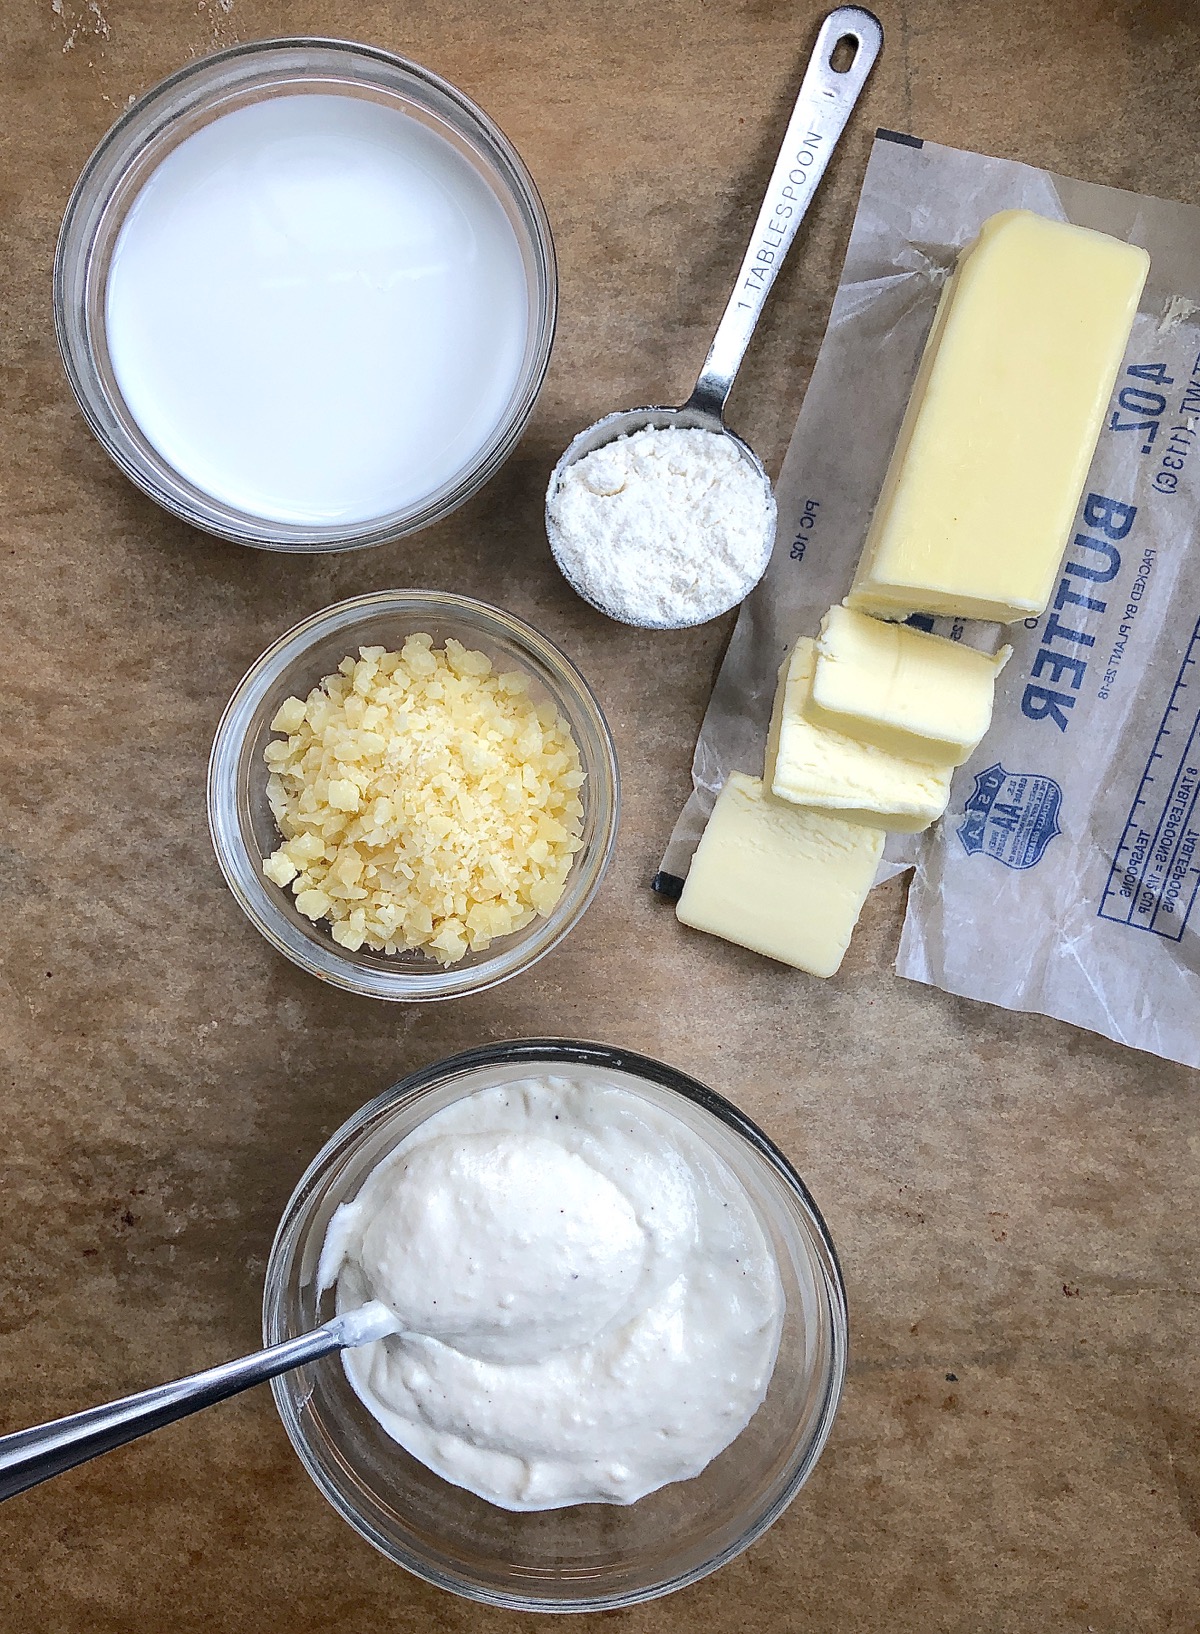 Ingredients for creamy cheesy sauce, including skim milk, grated Asiago cheese, butter, and flour.